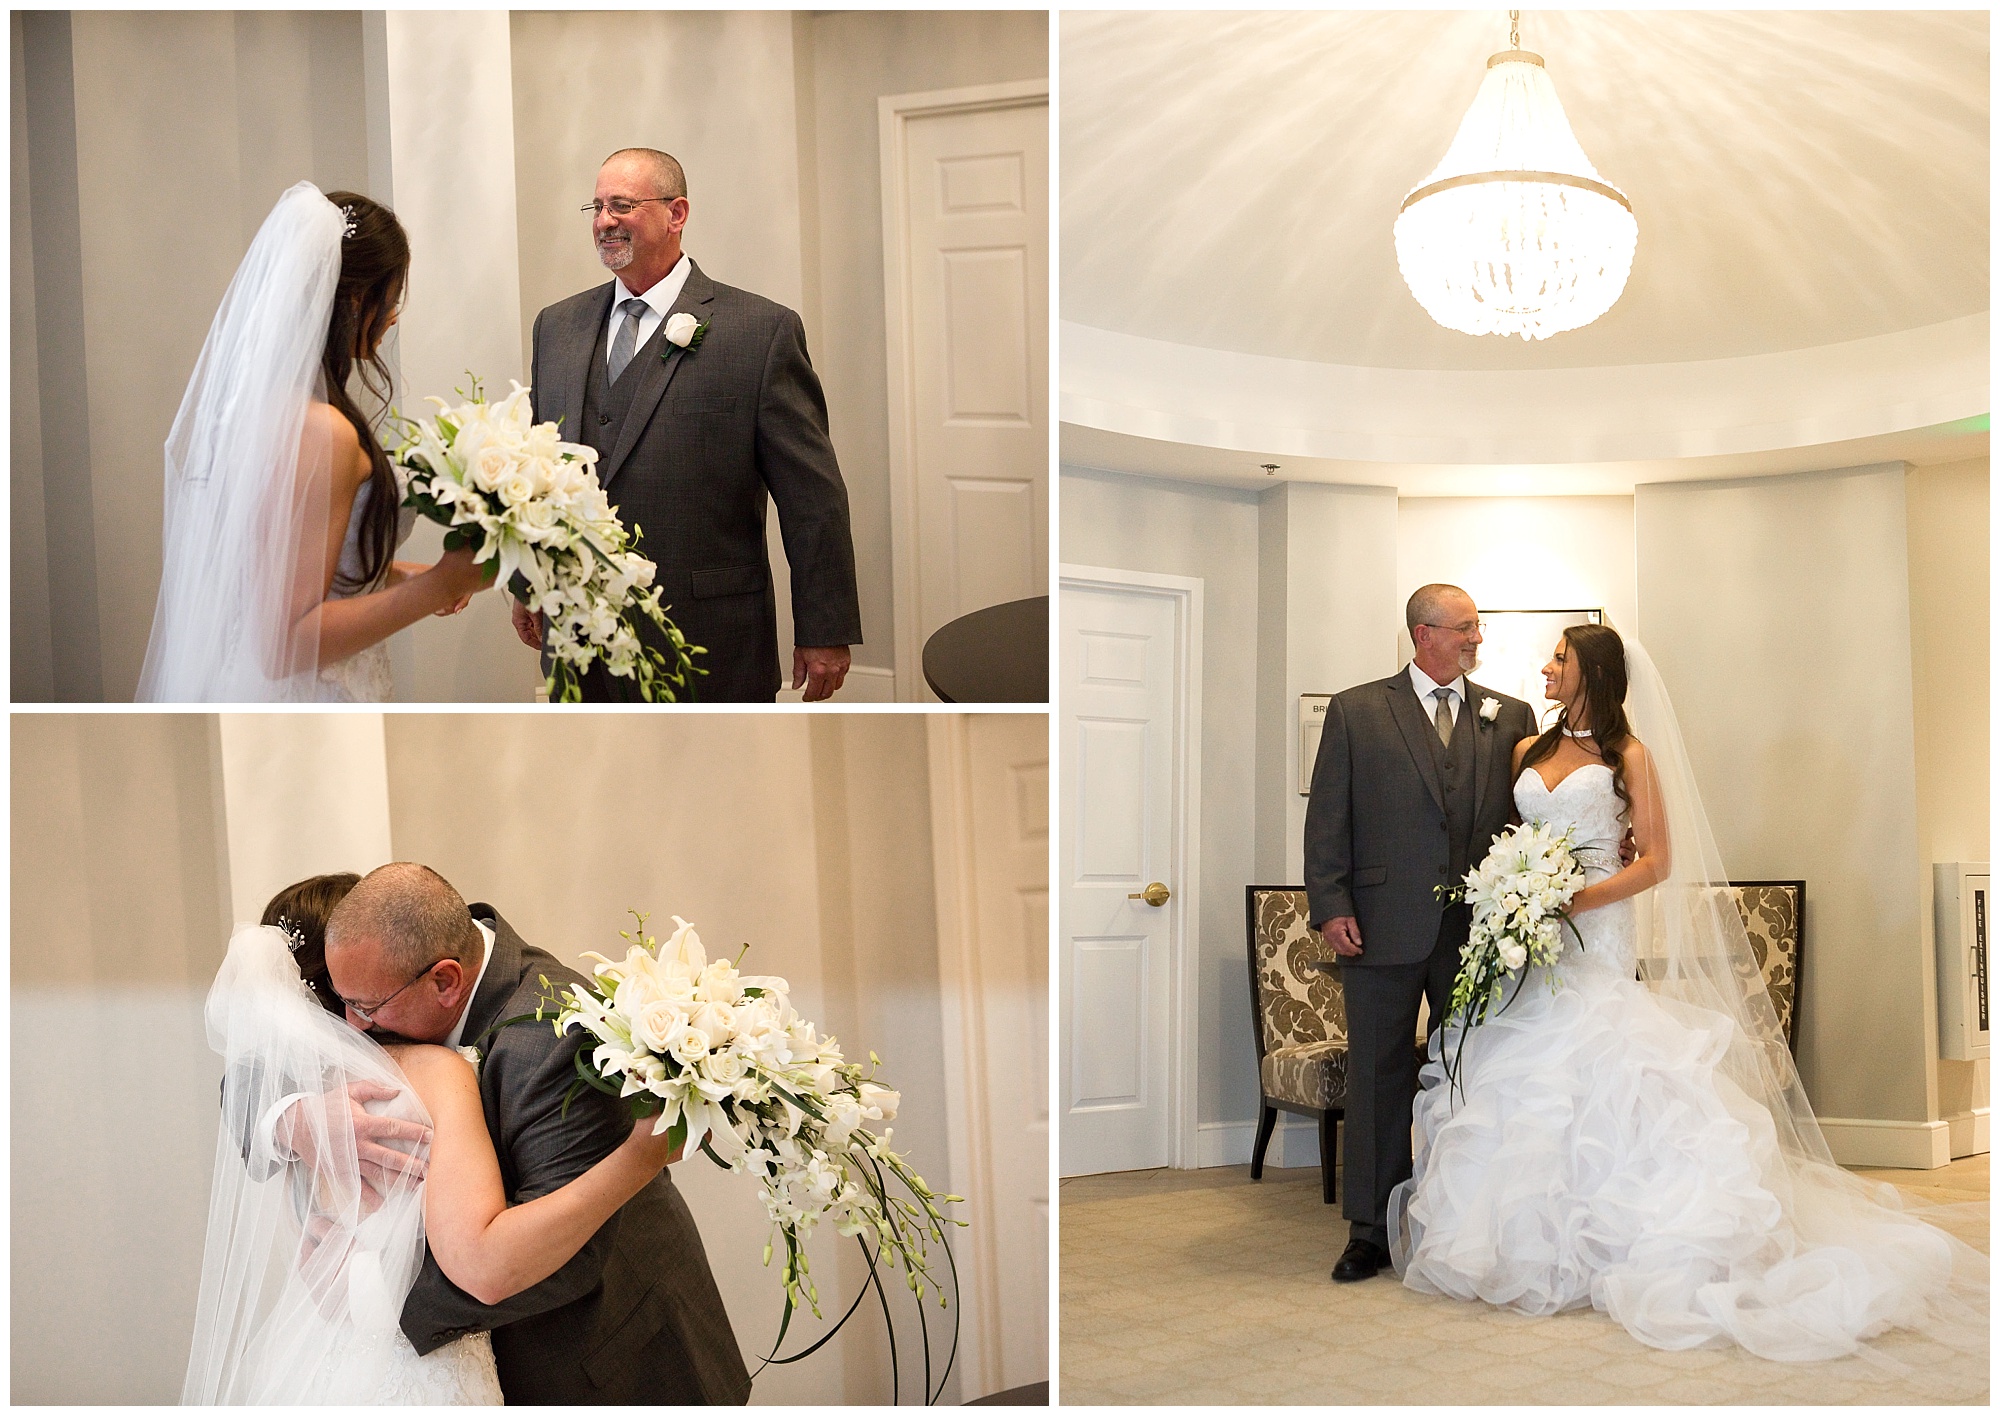 Photos of a bride's father seeing in her wedding dress for the first time.